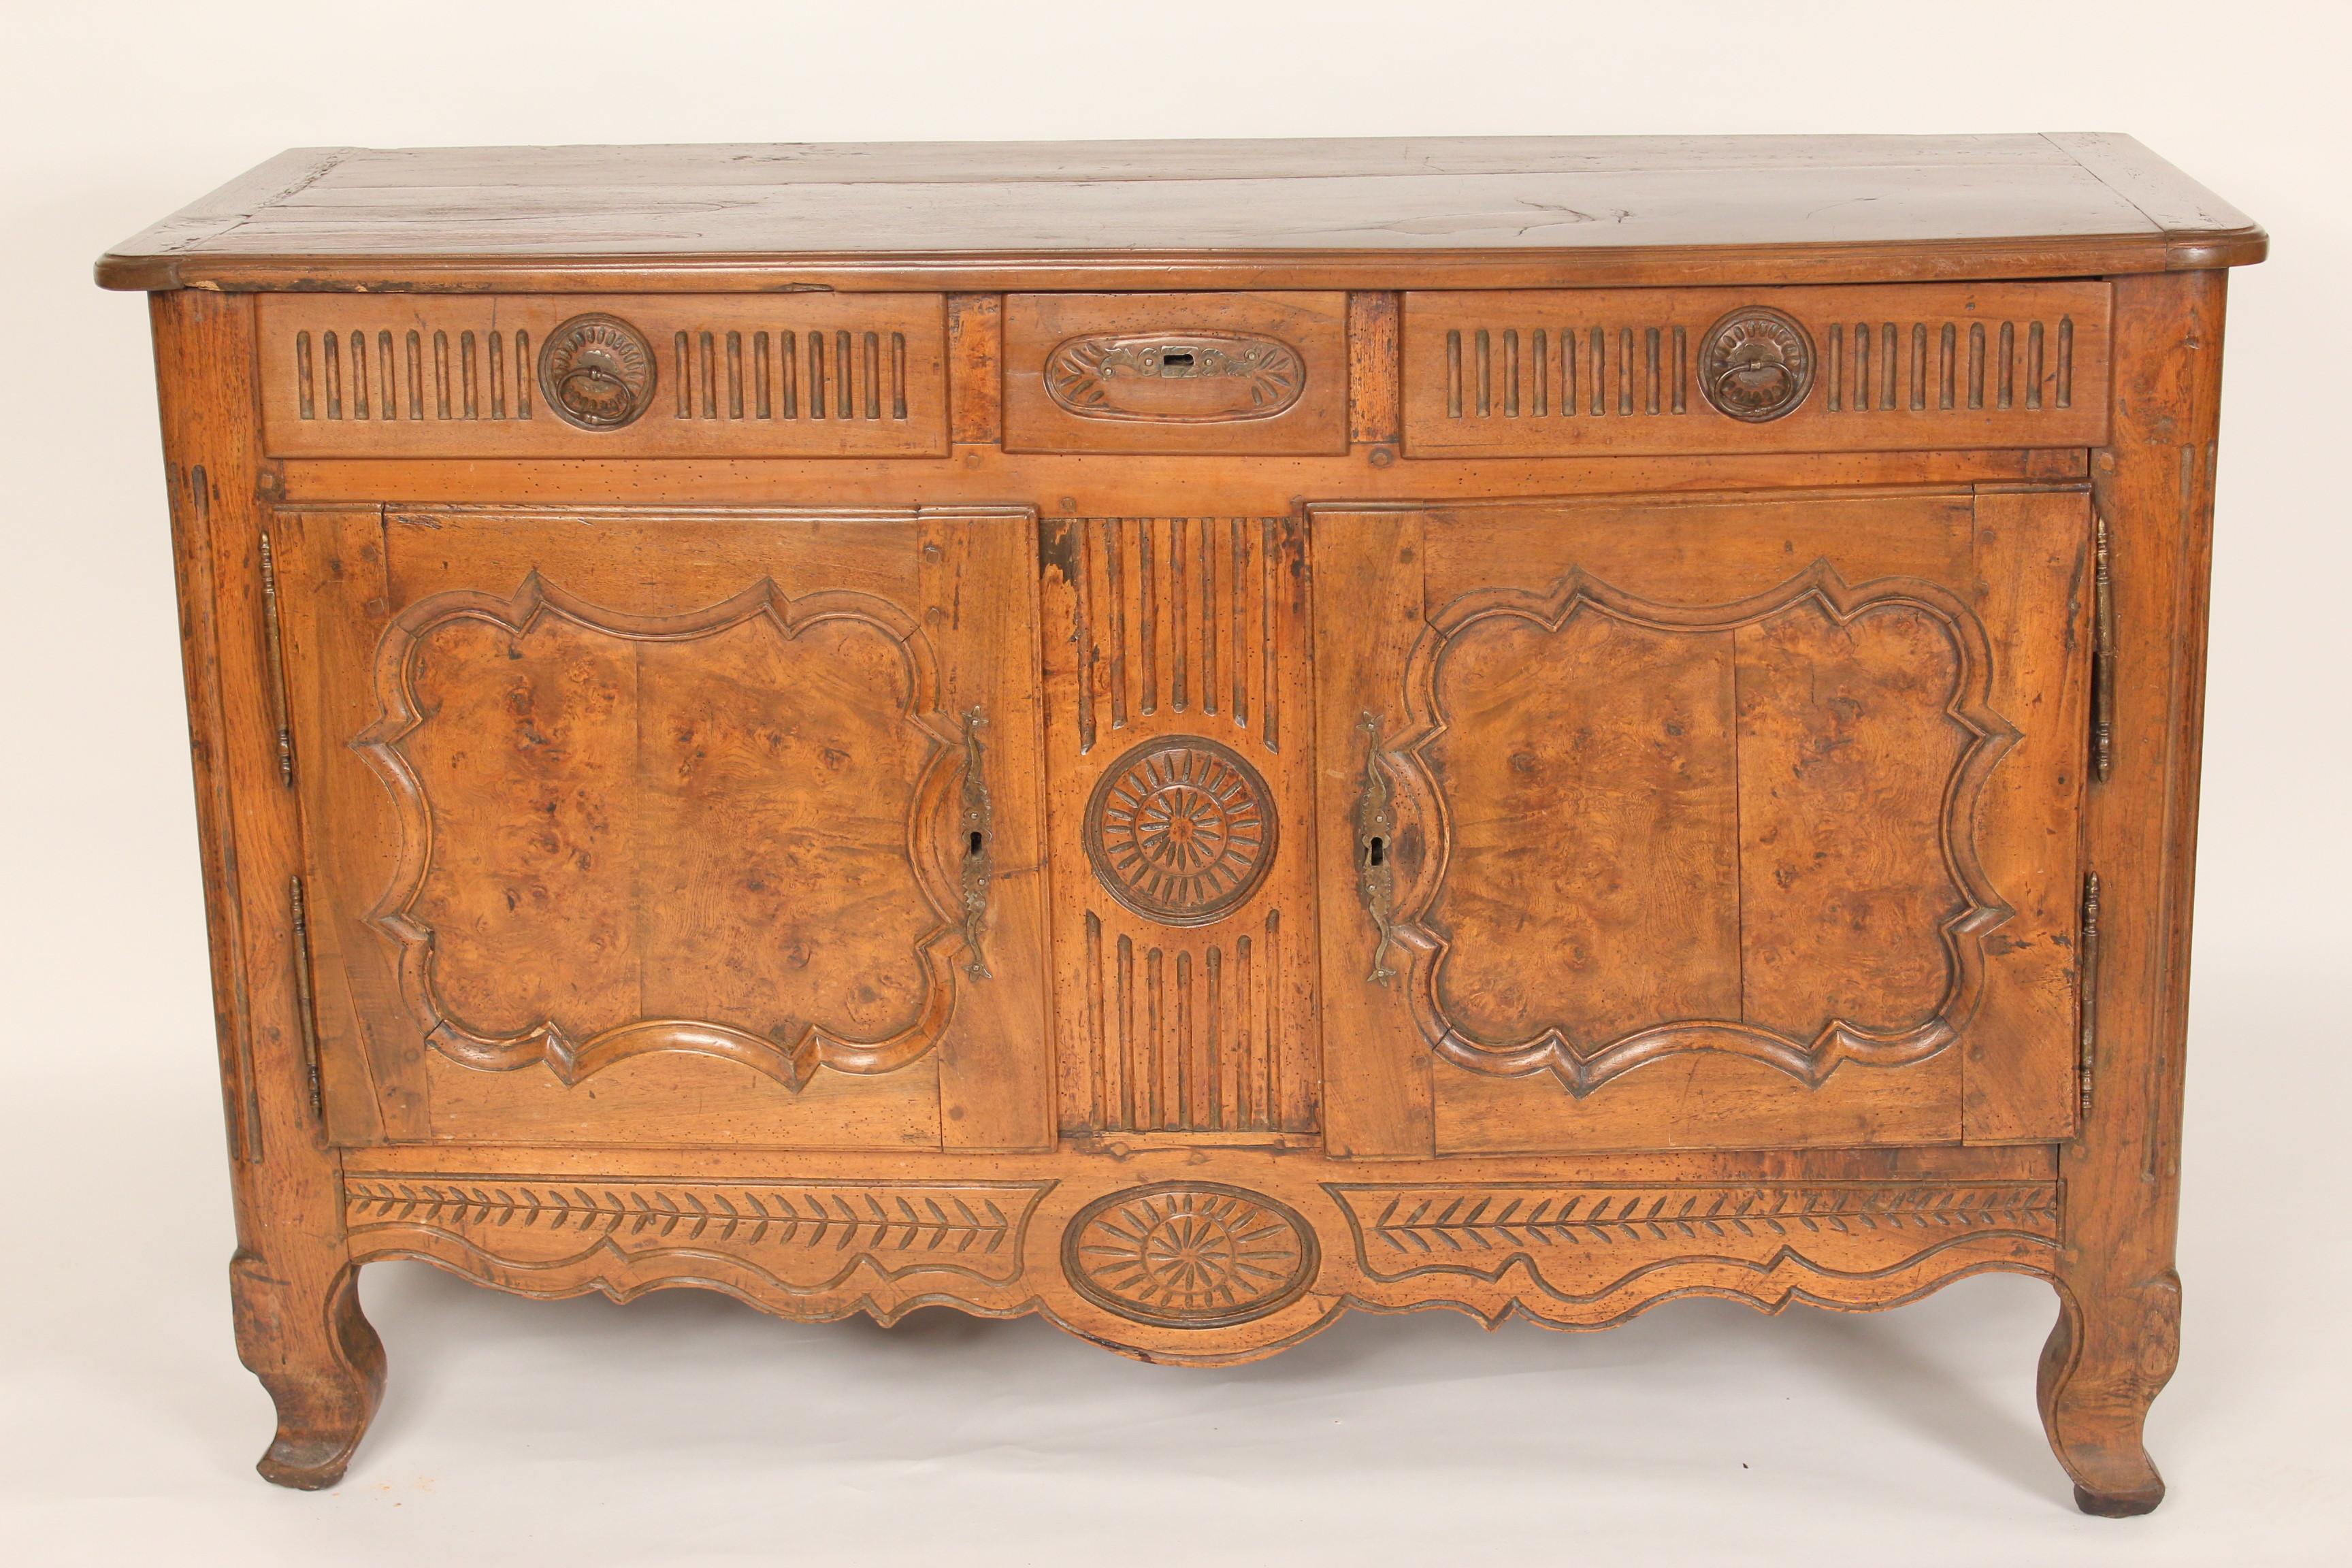 Antique Louis XV style provincial walnut and bur elm buffet, early 19th century. Excellent color on the front and sides. The top has been restored and refinished, the finish on the top is cloudy.